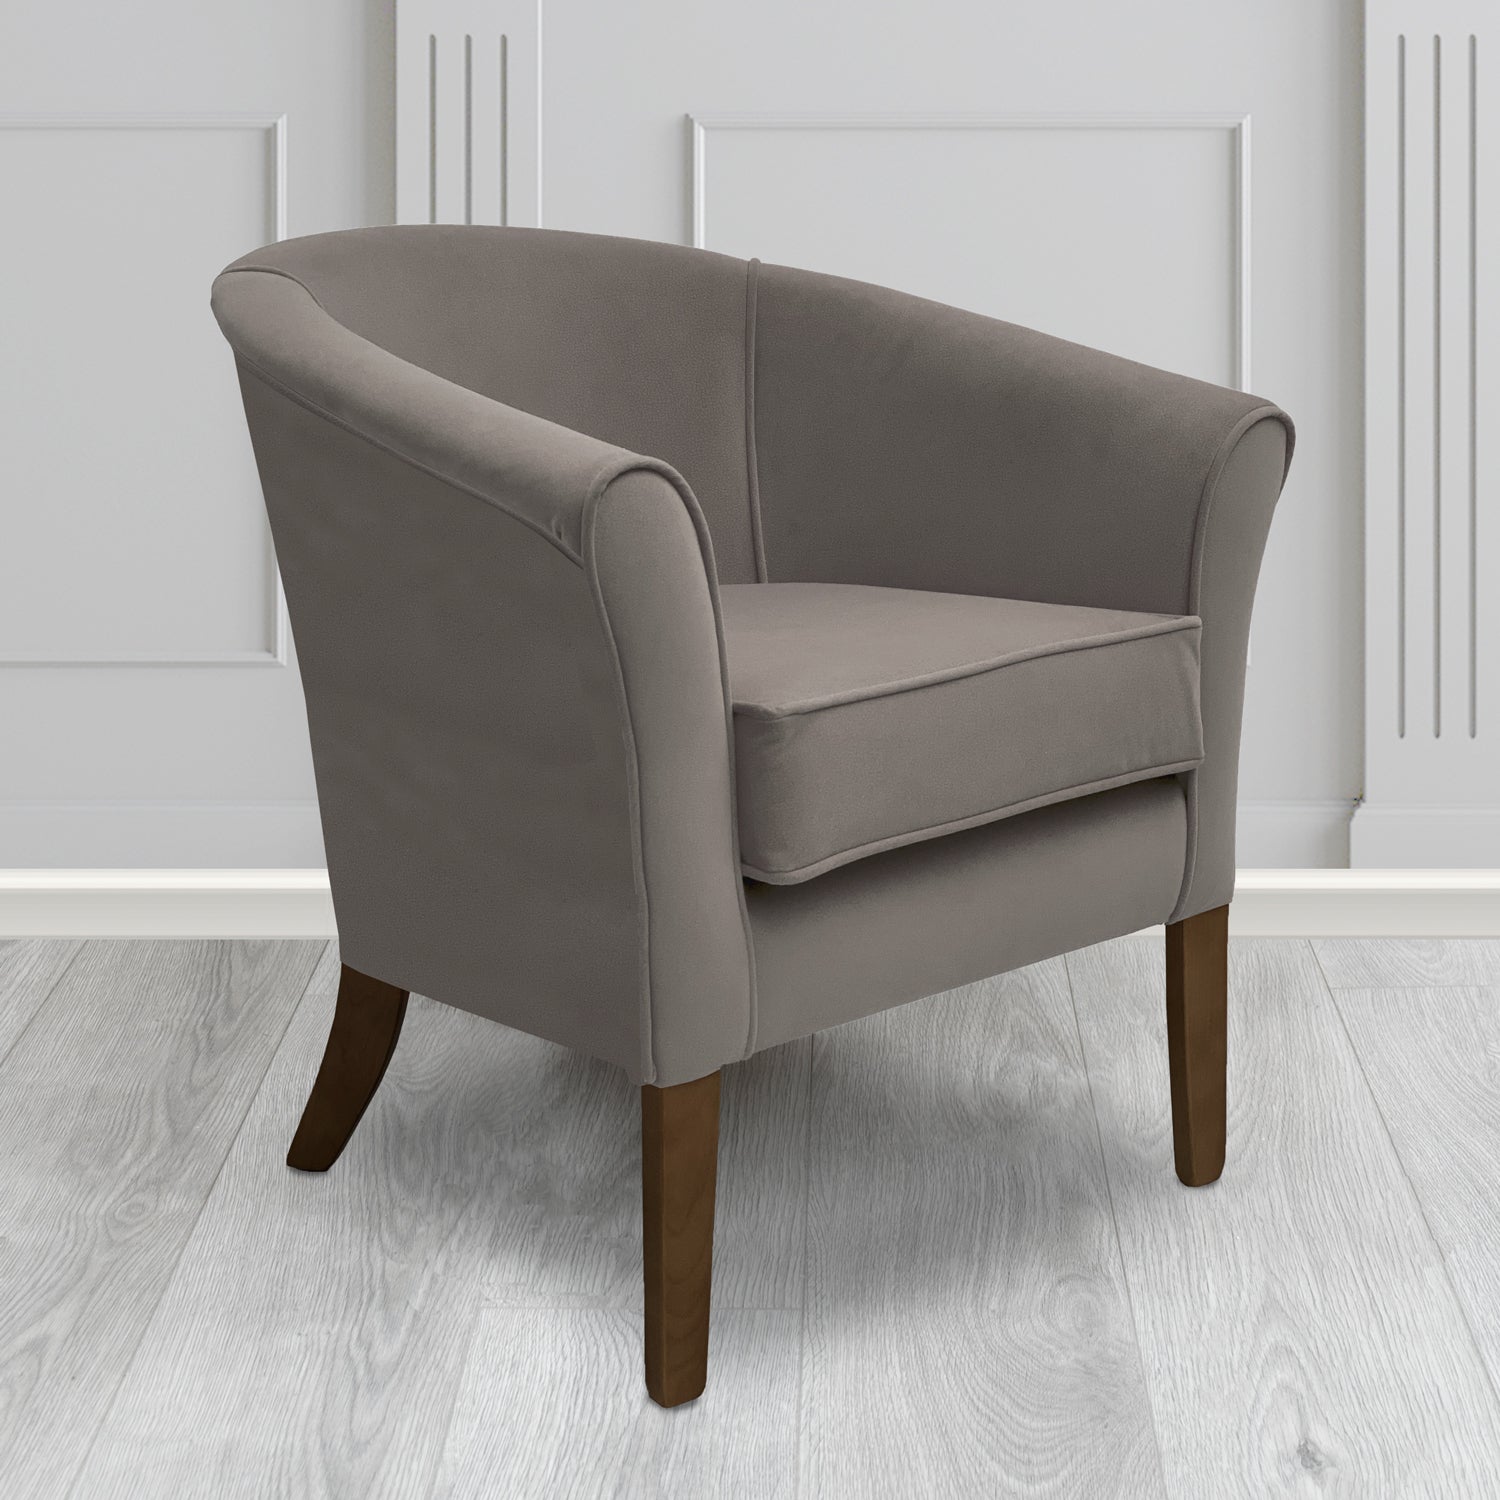 Aspen Tub Chair in Noble 971 Nickel Crib 5 Velvet Fabric - Water Resistant - The Tub Chair Shop